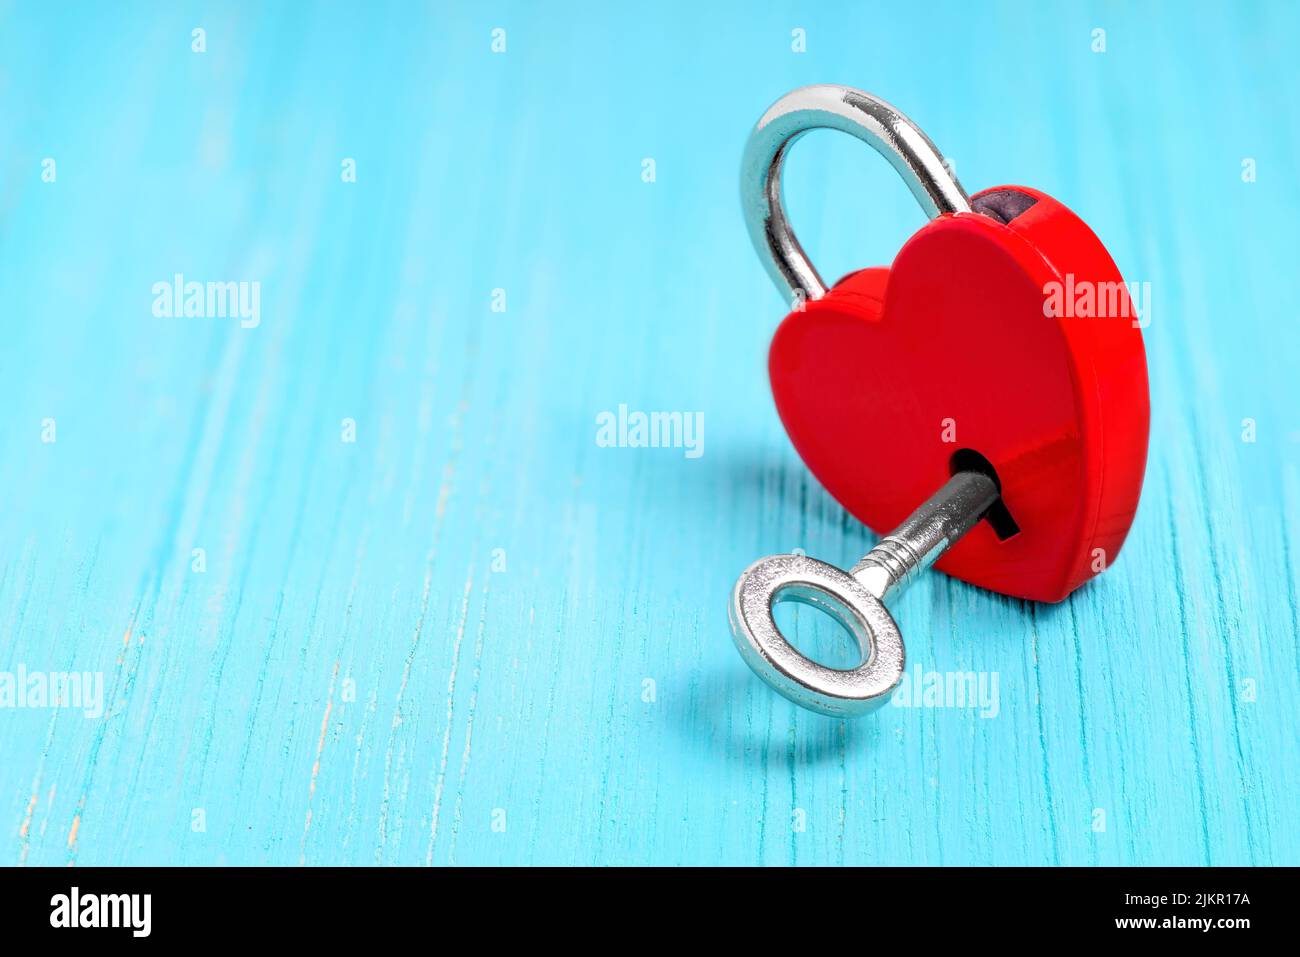 Silver-toned skeleton key in a small red heart-shaped padlock on a blue wooden background with copy space. Symbolic romantic concept. Stock Photo